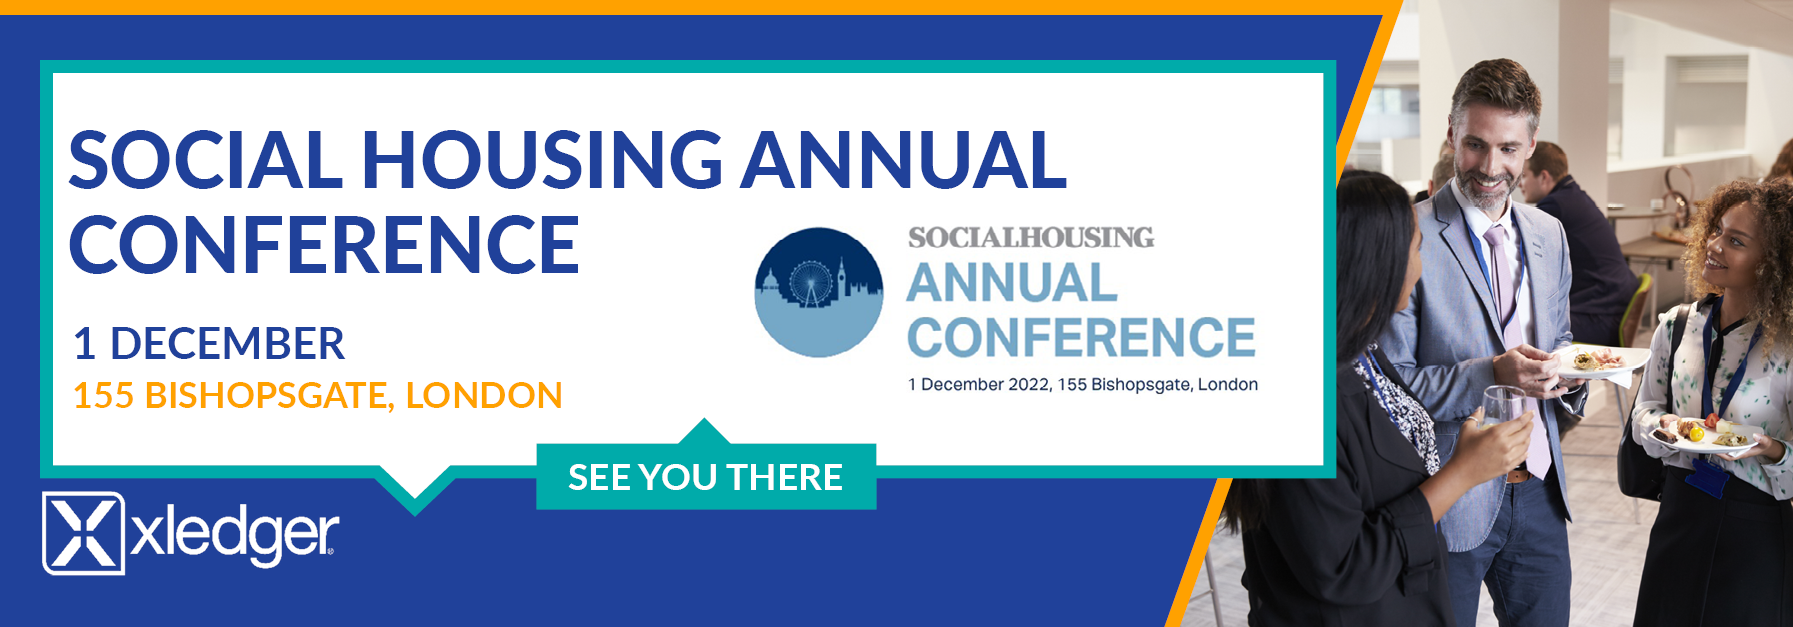 Social housing annual conference